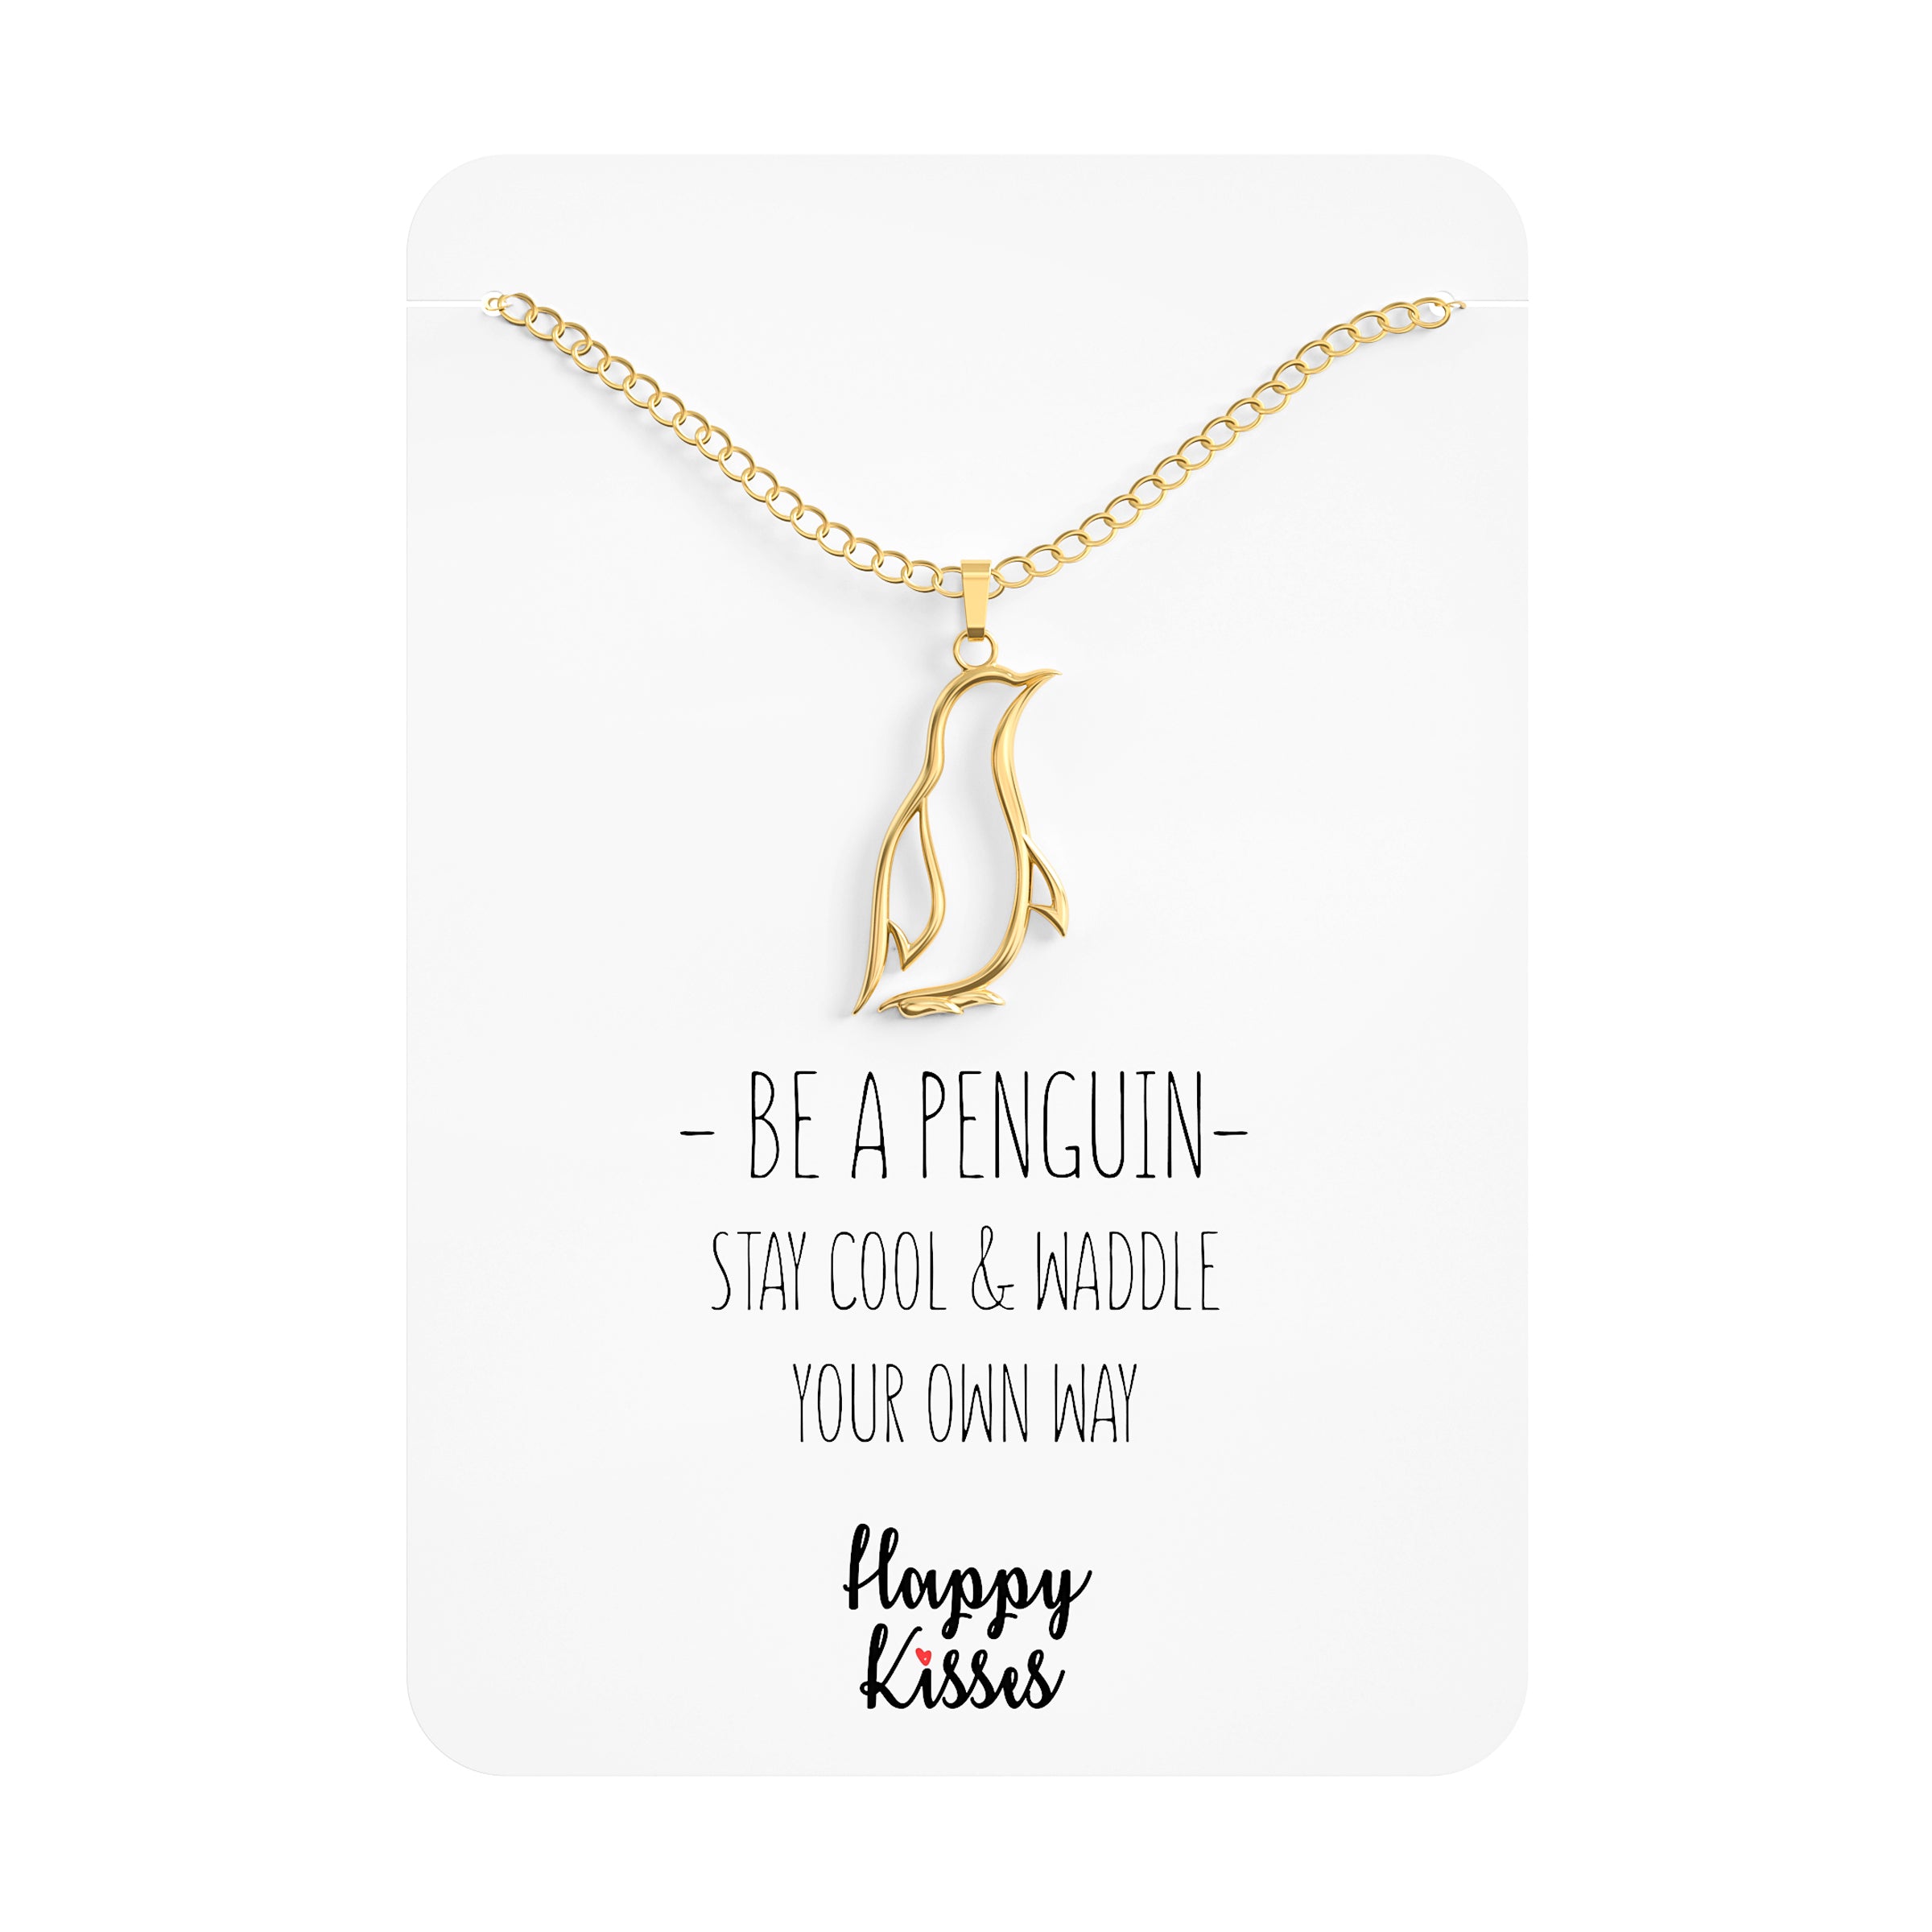 Penguin Necklace Be Kind Hug A Penguin Theme Friendship Jewelry 36-Inch